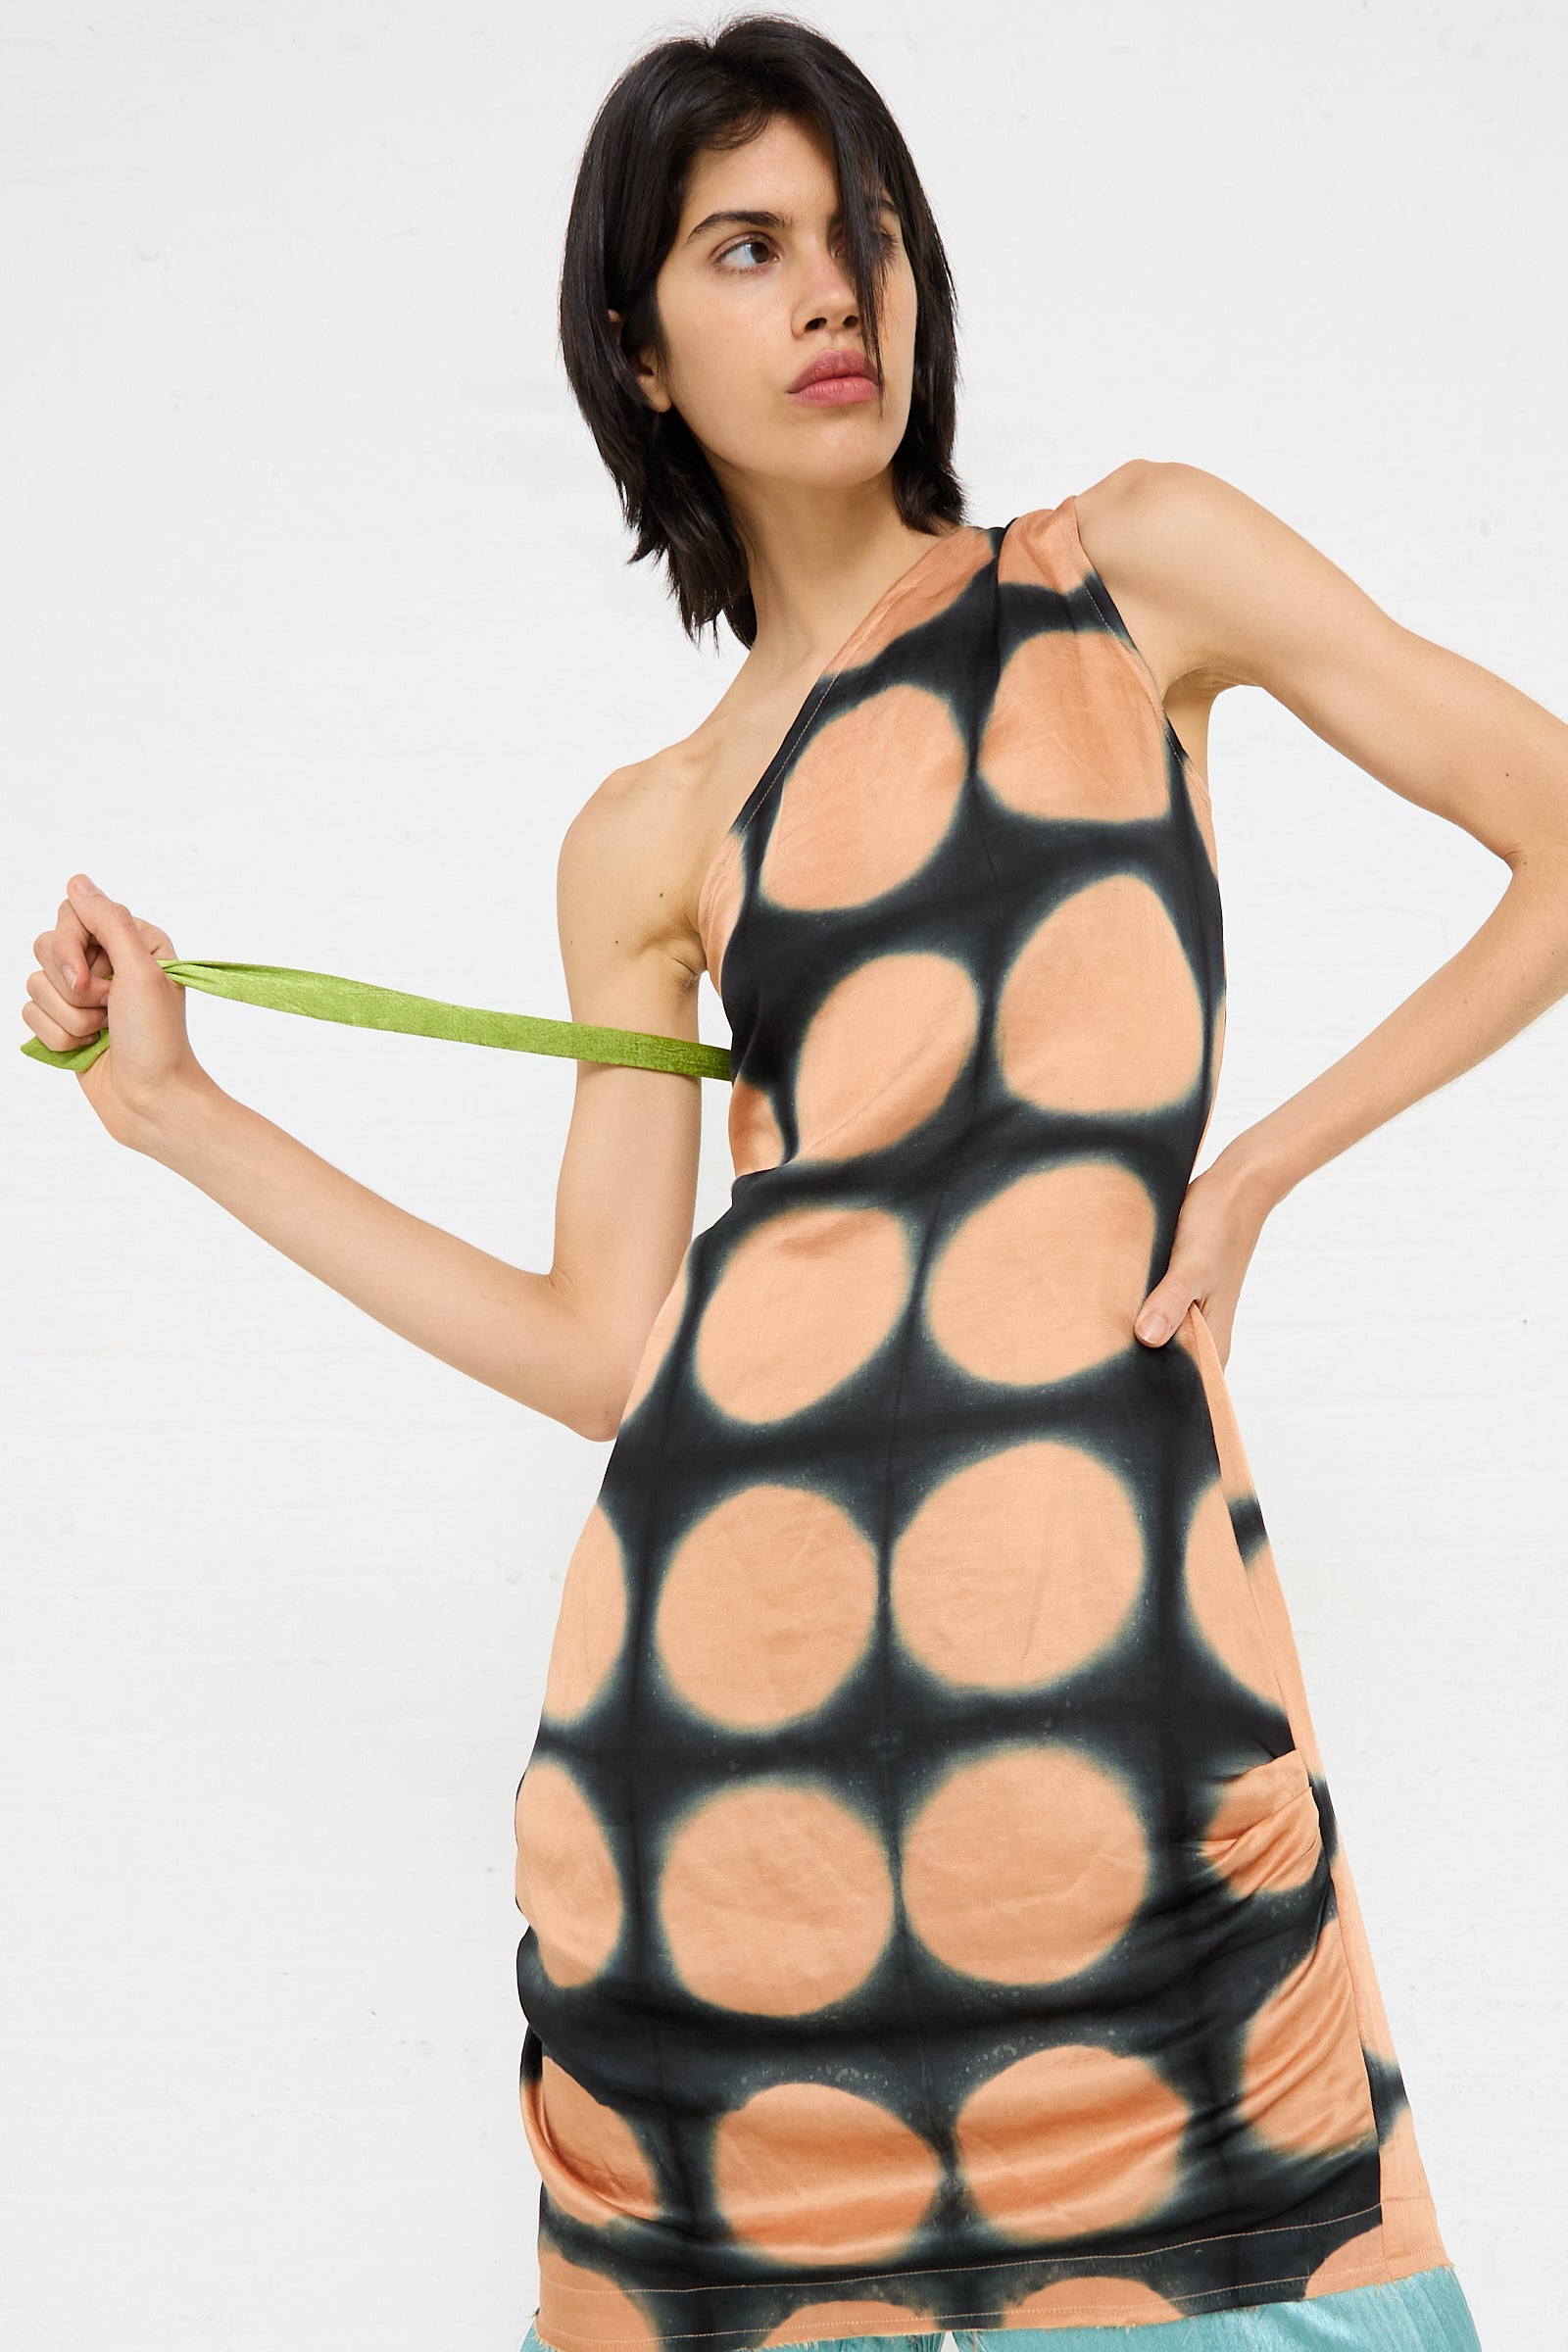 A person wearing a TIGRA TIGRA One Shoulder Mini Dot Dress holds a green strap while looking to the side. The background is plain white.